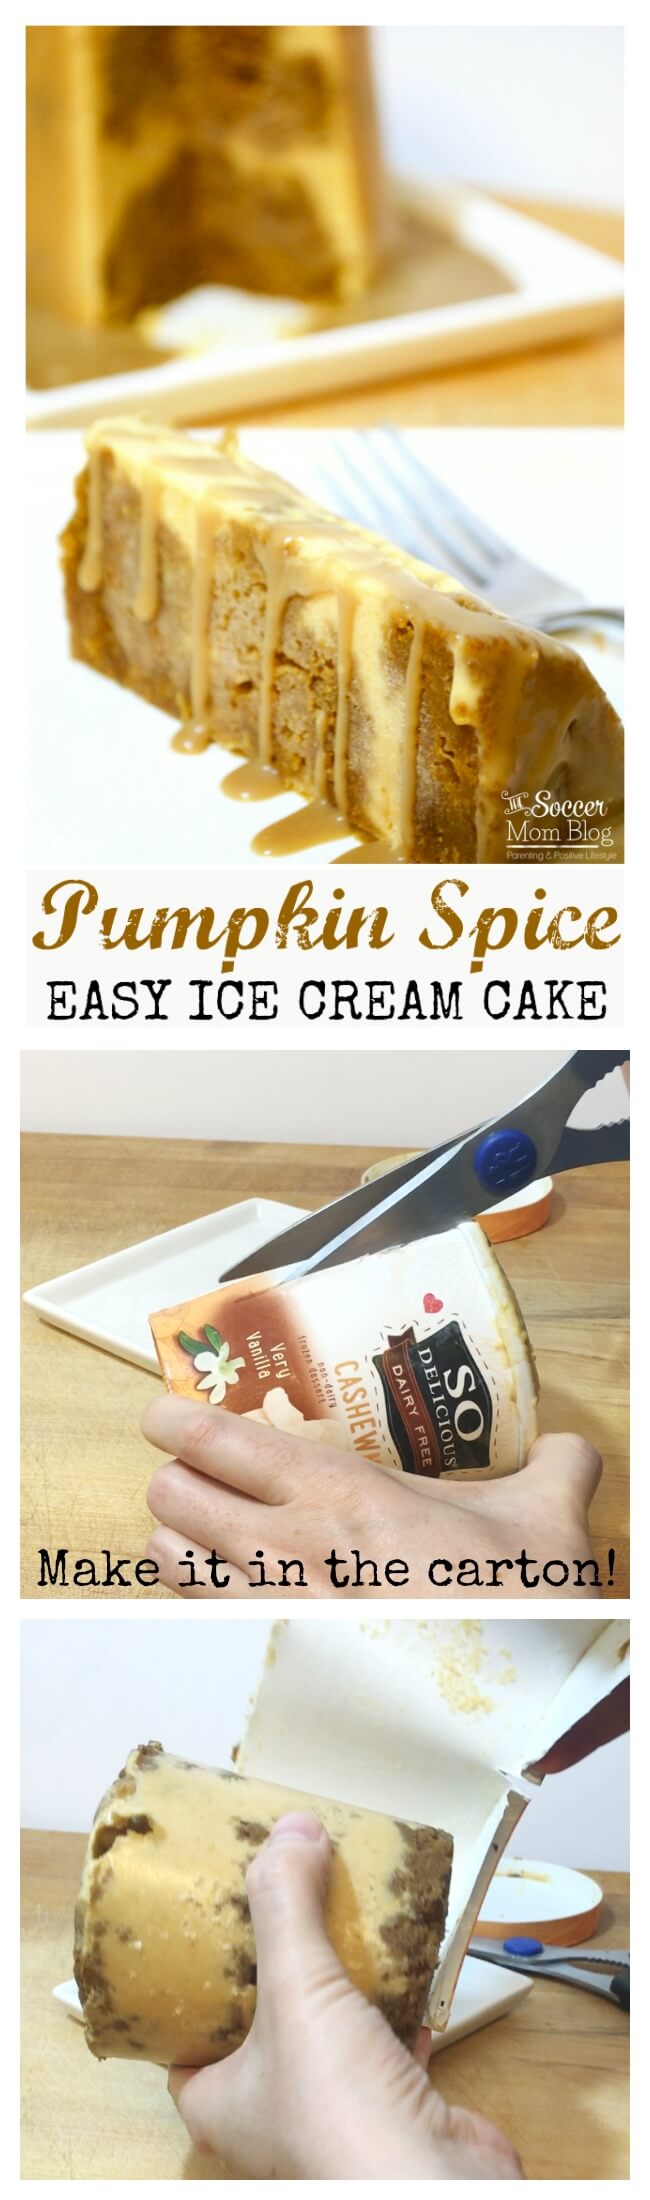 This Pumpkin Spice Ice Cream Cake is practically foolproof — you make it right in the carton! The perfect unique and EASY Thanksgiving dessert!